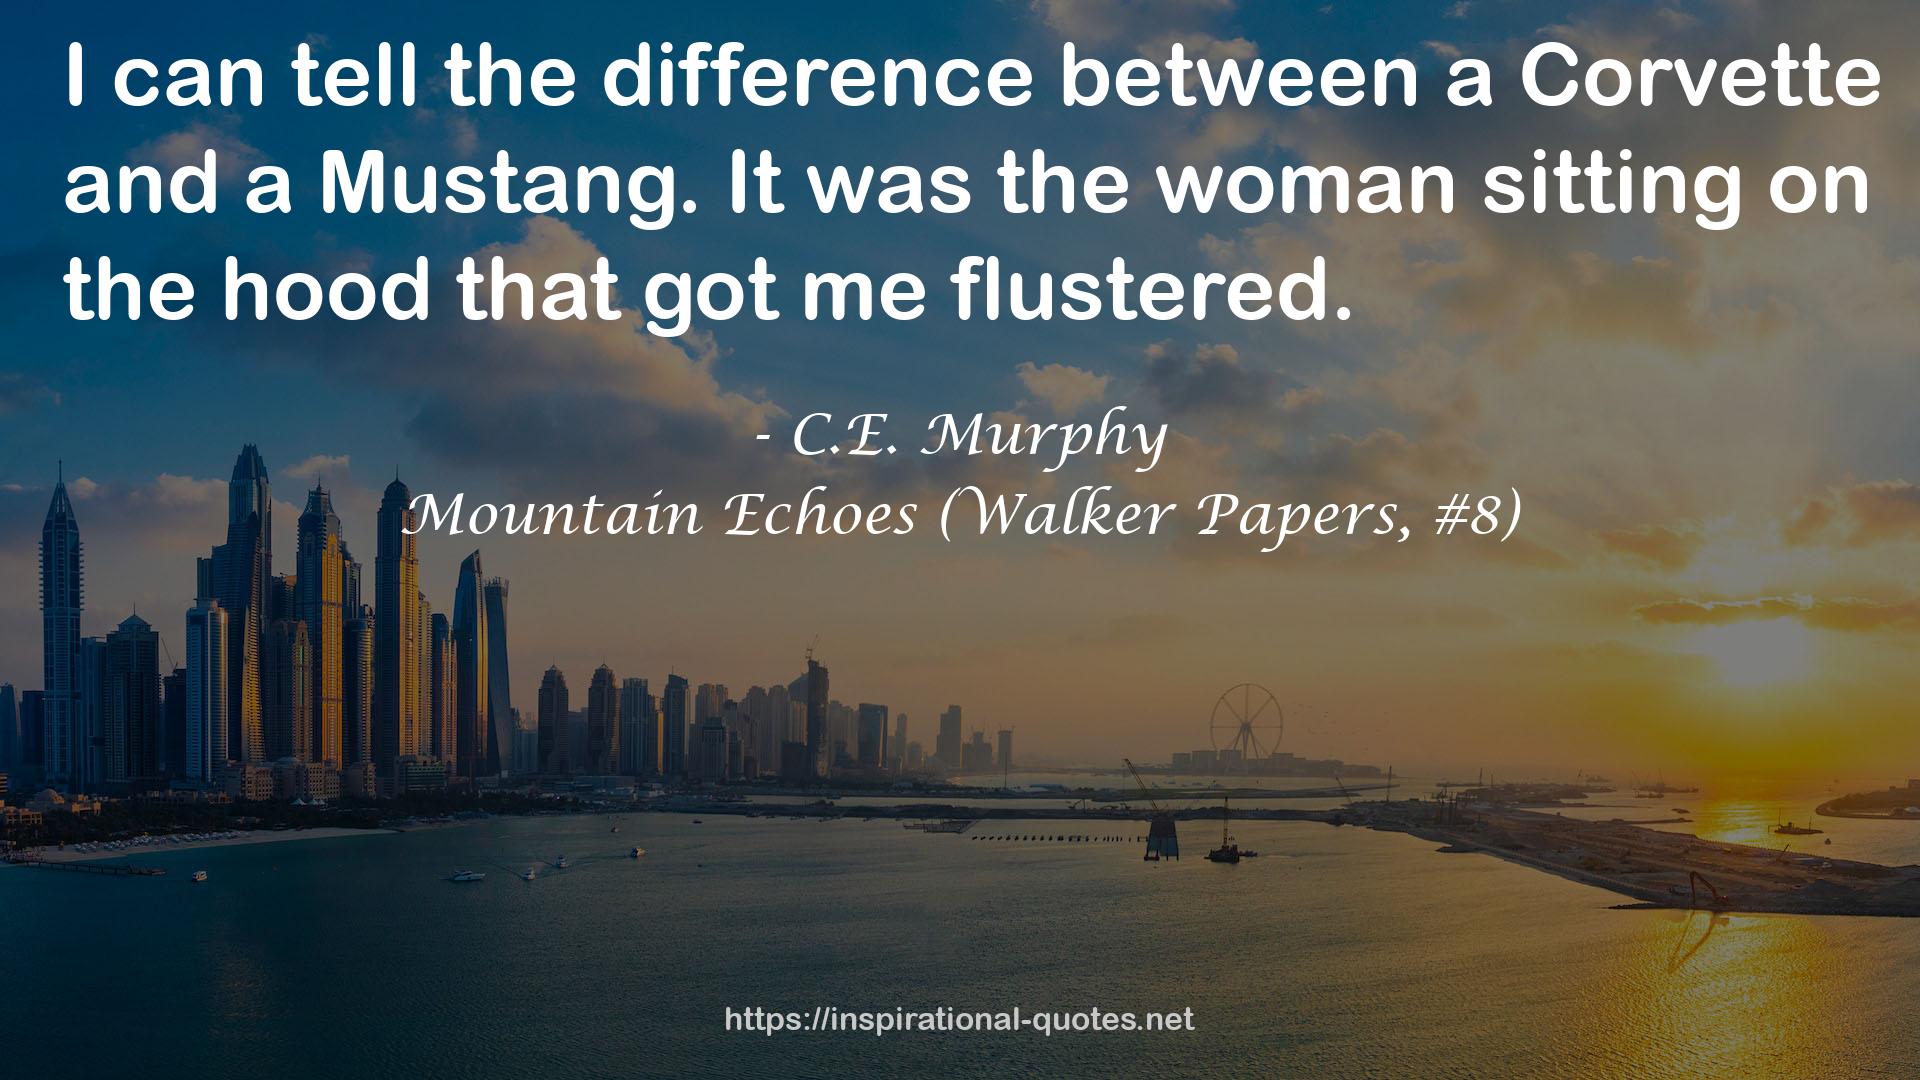 Mountain Echoes (Walker Papers, #8) QUOTES